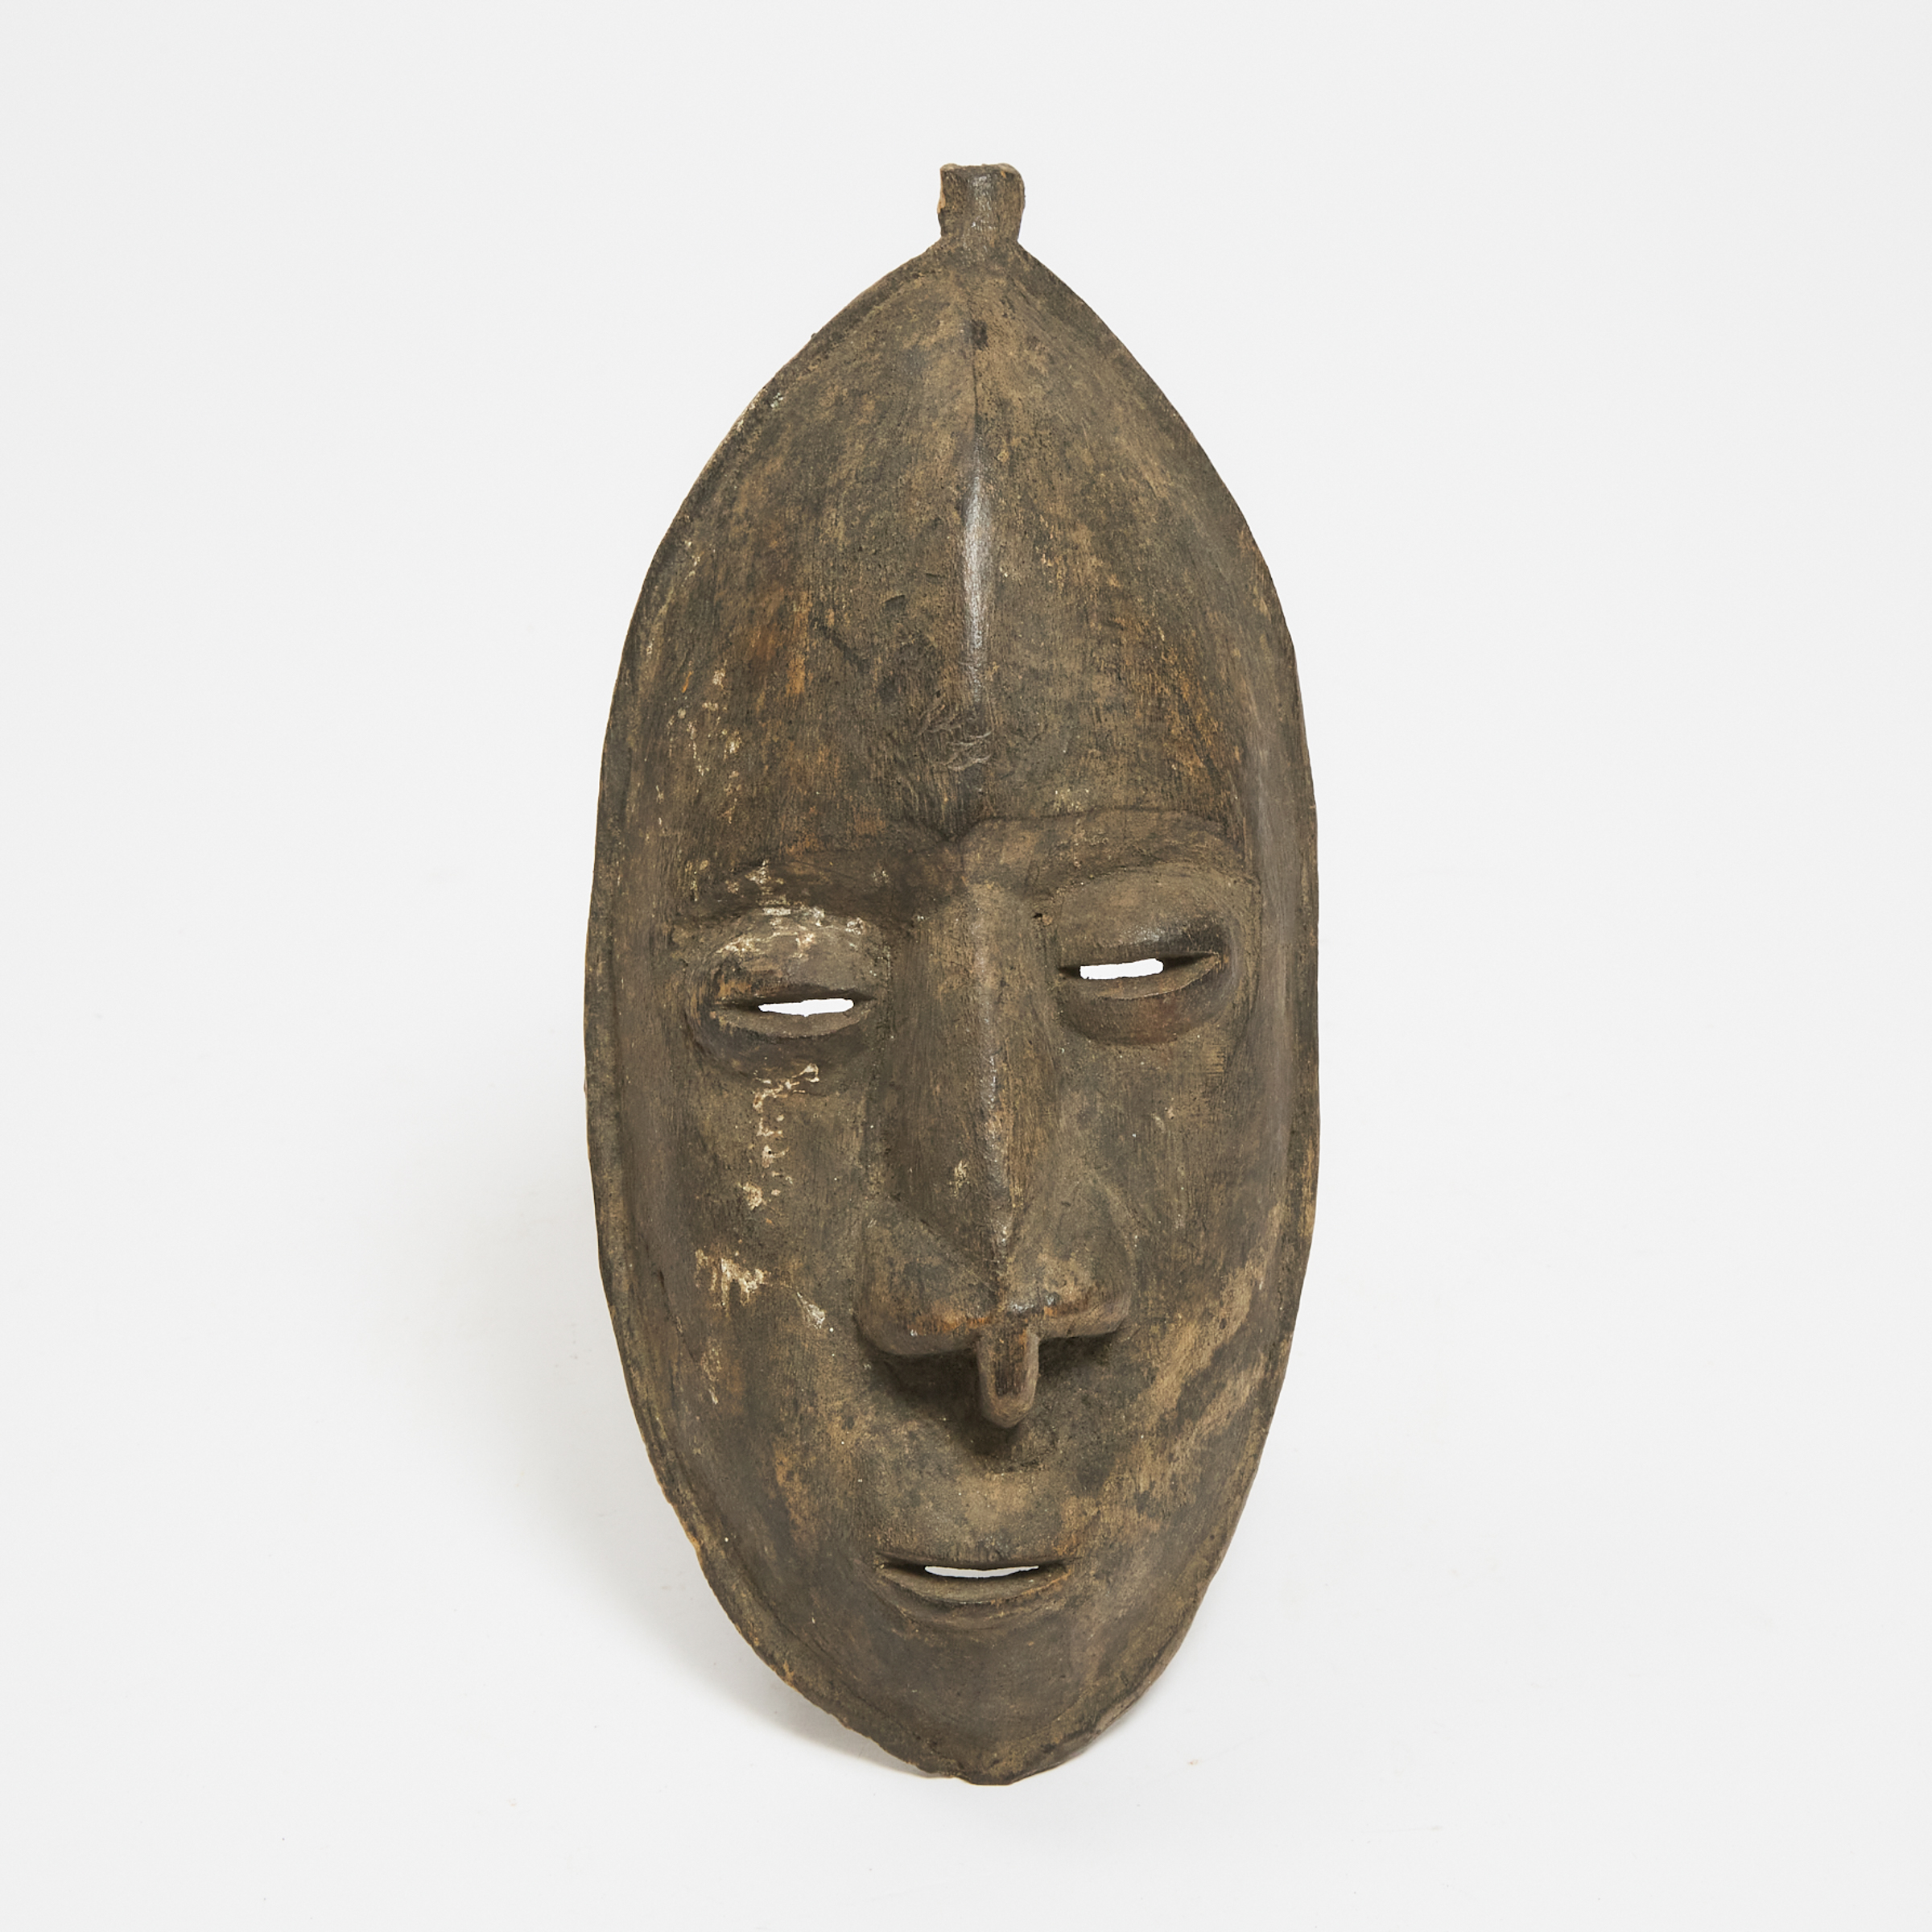 Papua New Guinea Mask, early to mid 20th century